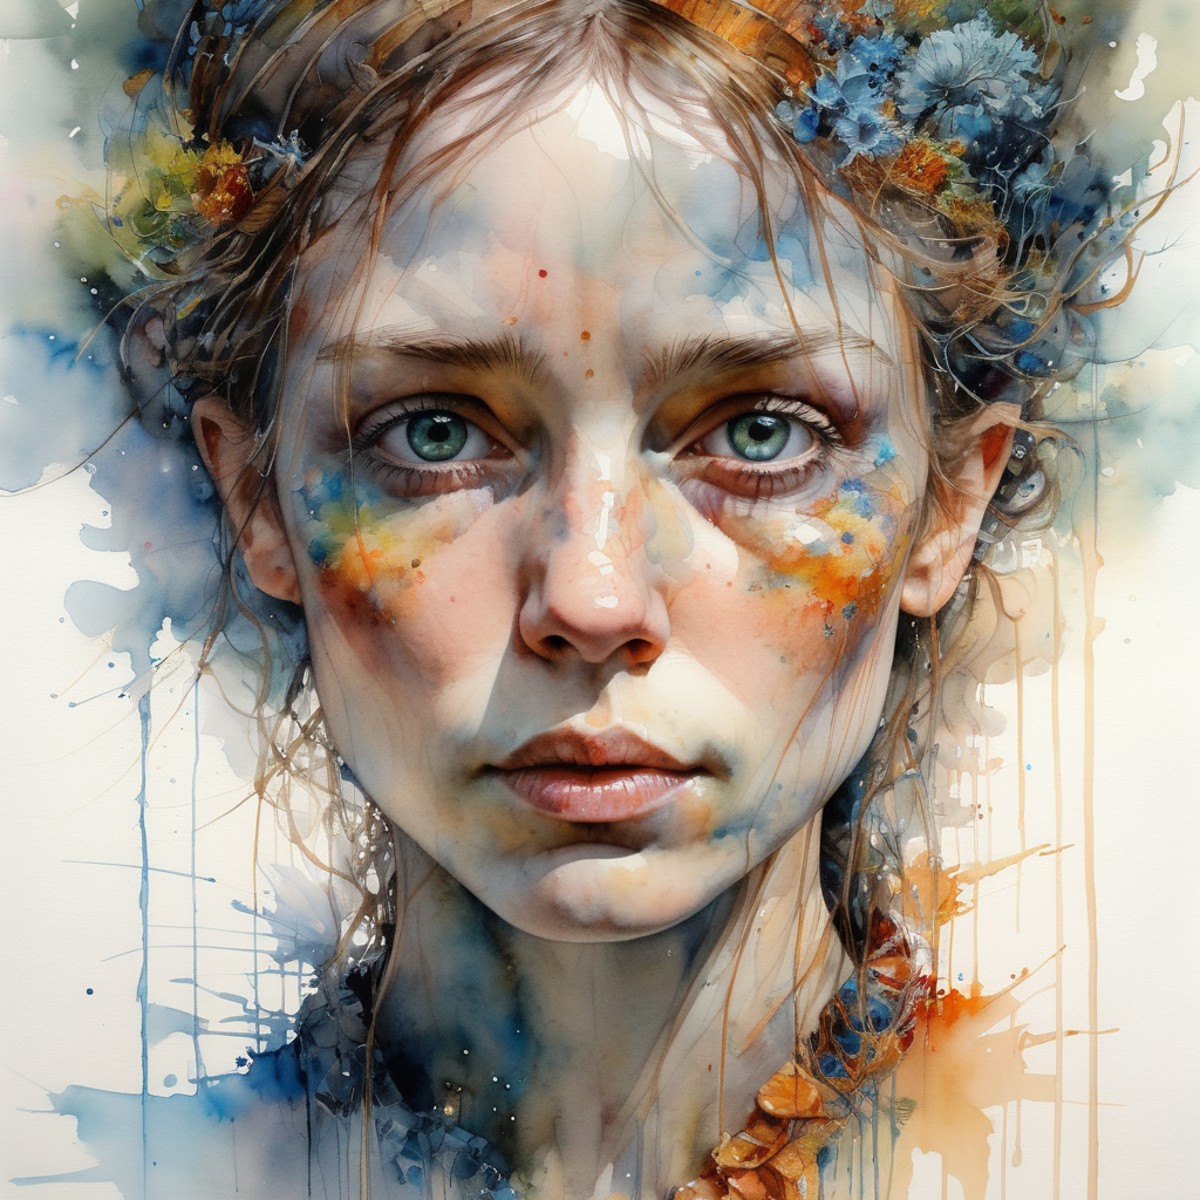 wonderful artistic impressionist watercolor painting by Carne Griffiths, James Christensen, Geoffroy Thoorens, Claude Mone...